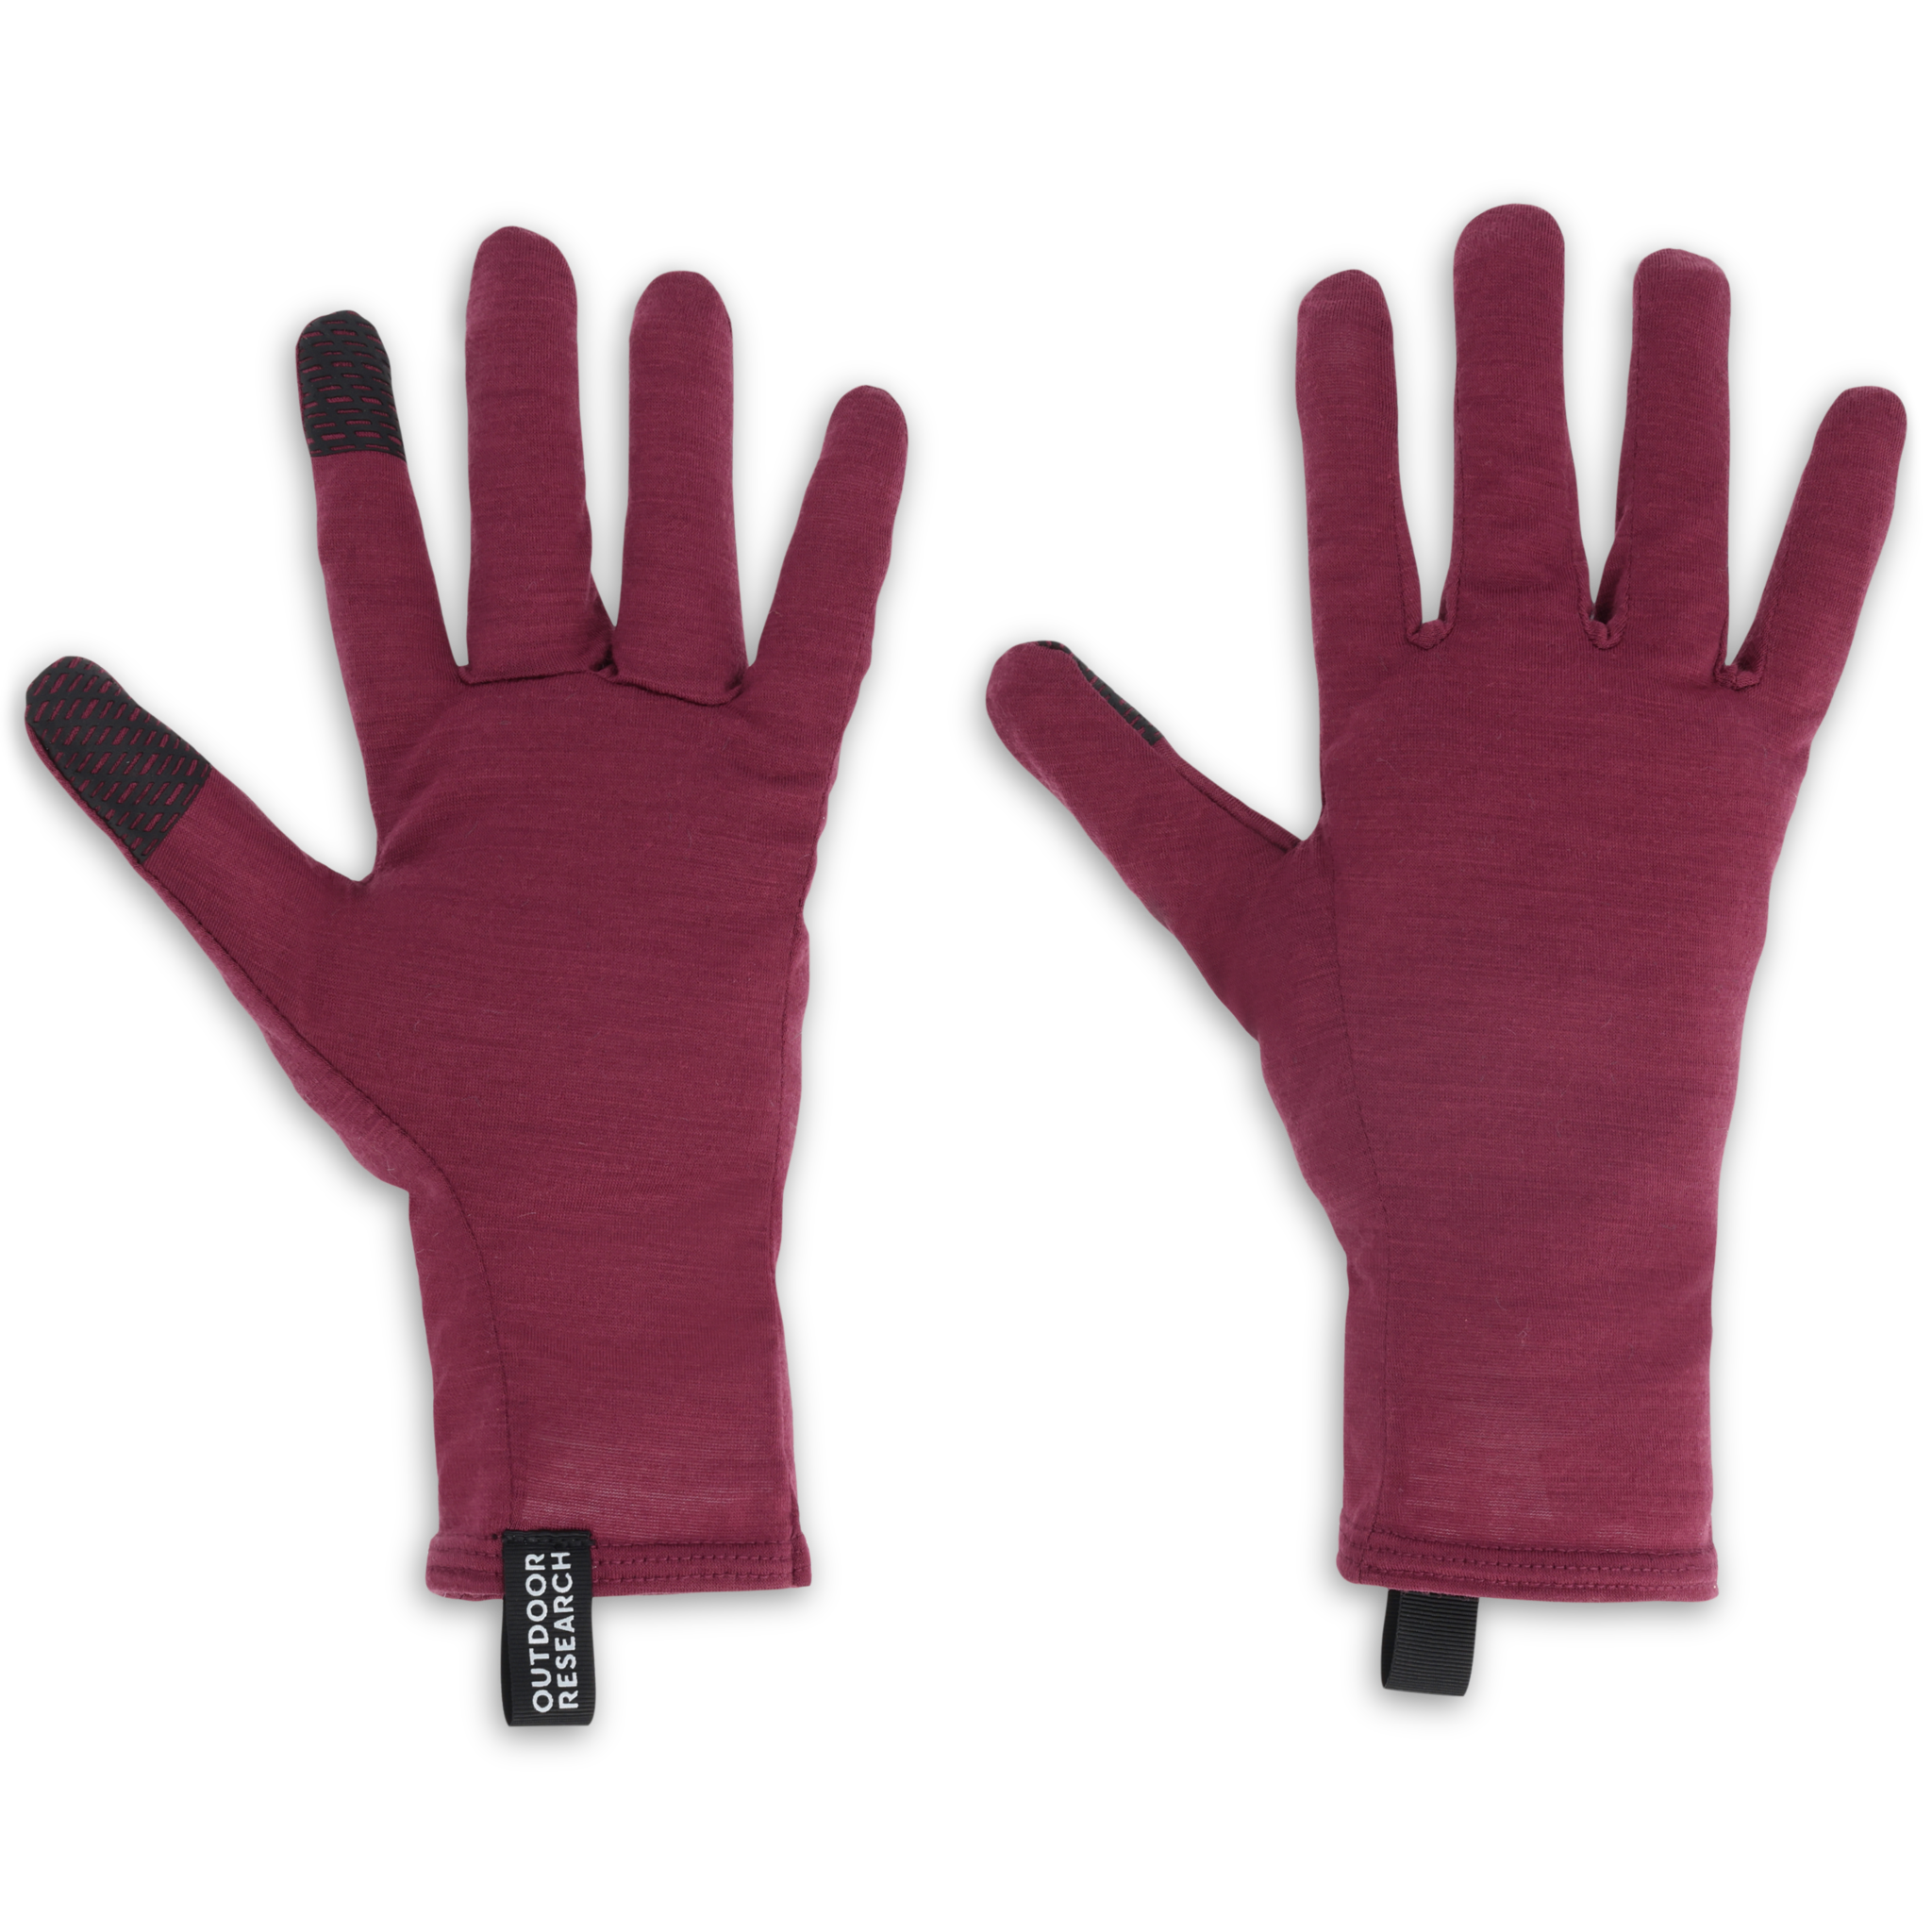 Outdoor Research Merino 150 Sensor Glove Liners - Summit Cycles & Sports